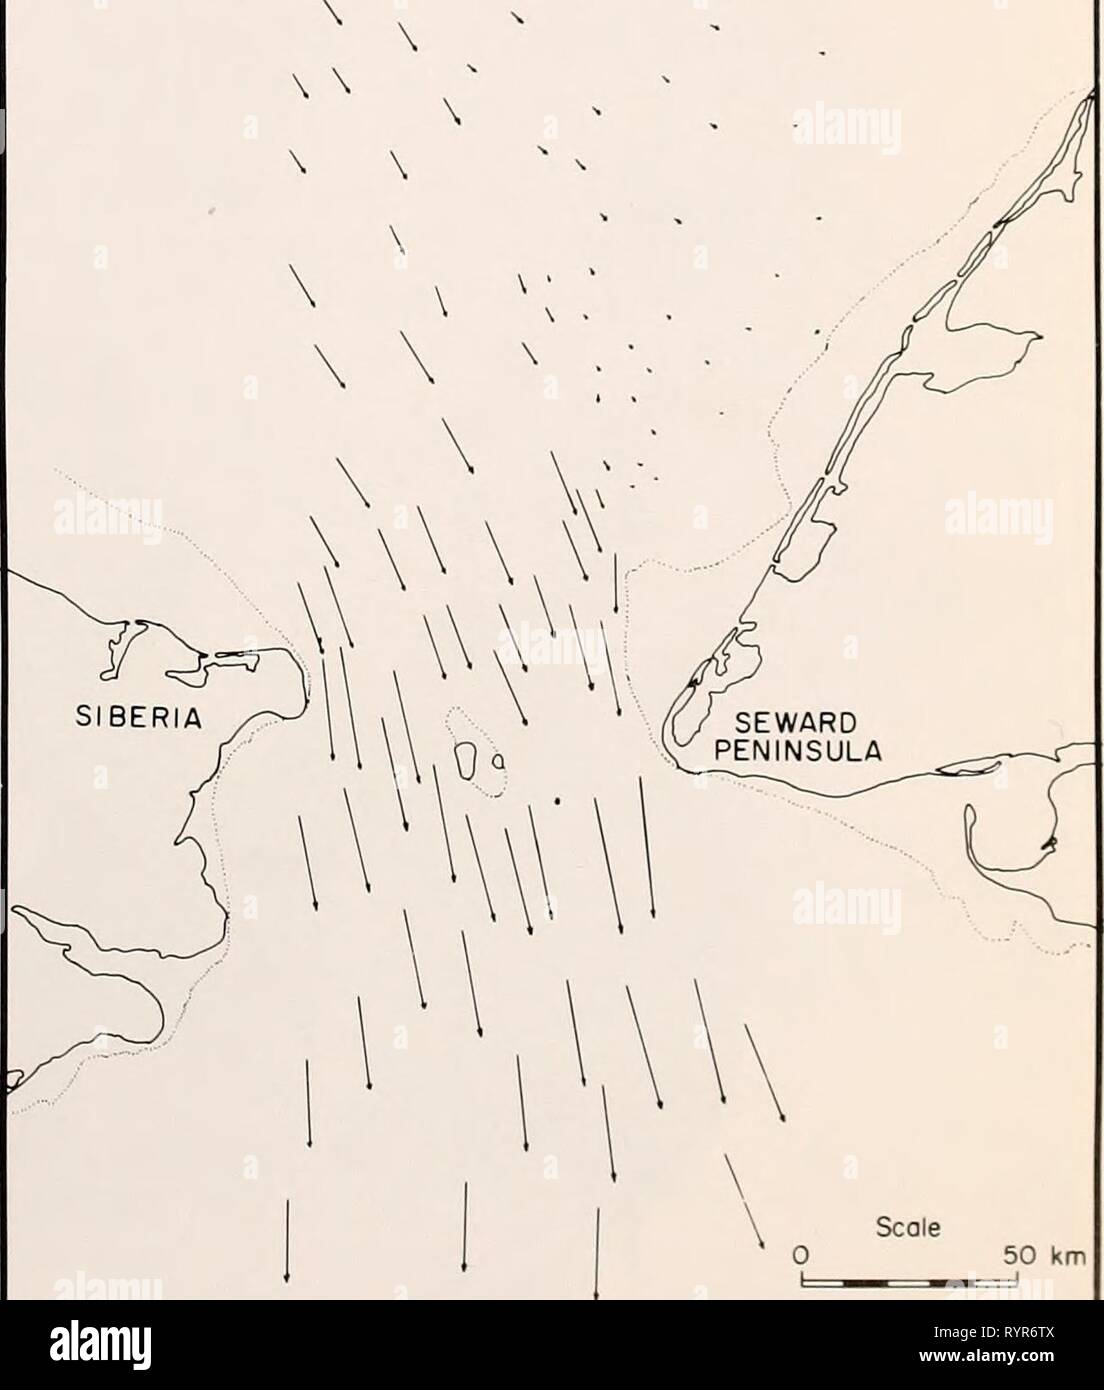 The Eastern Bering Sea Shelf The Eastern Bering Sea Shelf : oceanography and resources / edited by Donald W. Hood and John A. Calder . easternberingsea00hood Year: 1981  50 km Figure 46-2. Displacement vectors of individual ice floes in the Bering Strait region for the interval March 6-7, 1973. Scale of vectors is indicated on map. Dotted lines indicate seaward margin of fast ice (from Shapiro and Burns 1975b, Fig. 3, p. 382). Stock Photo